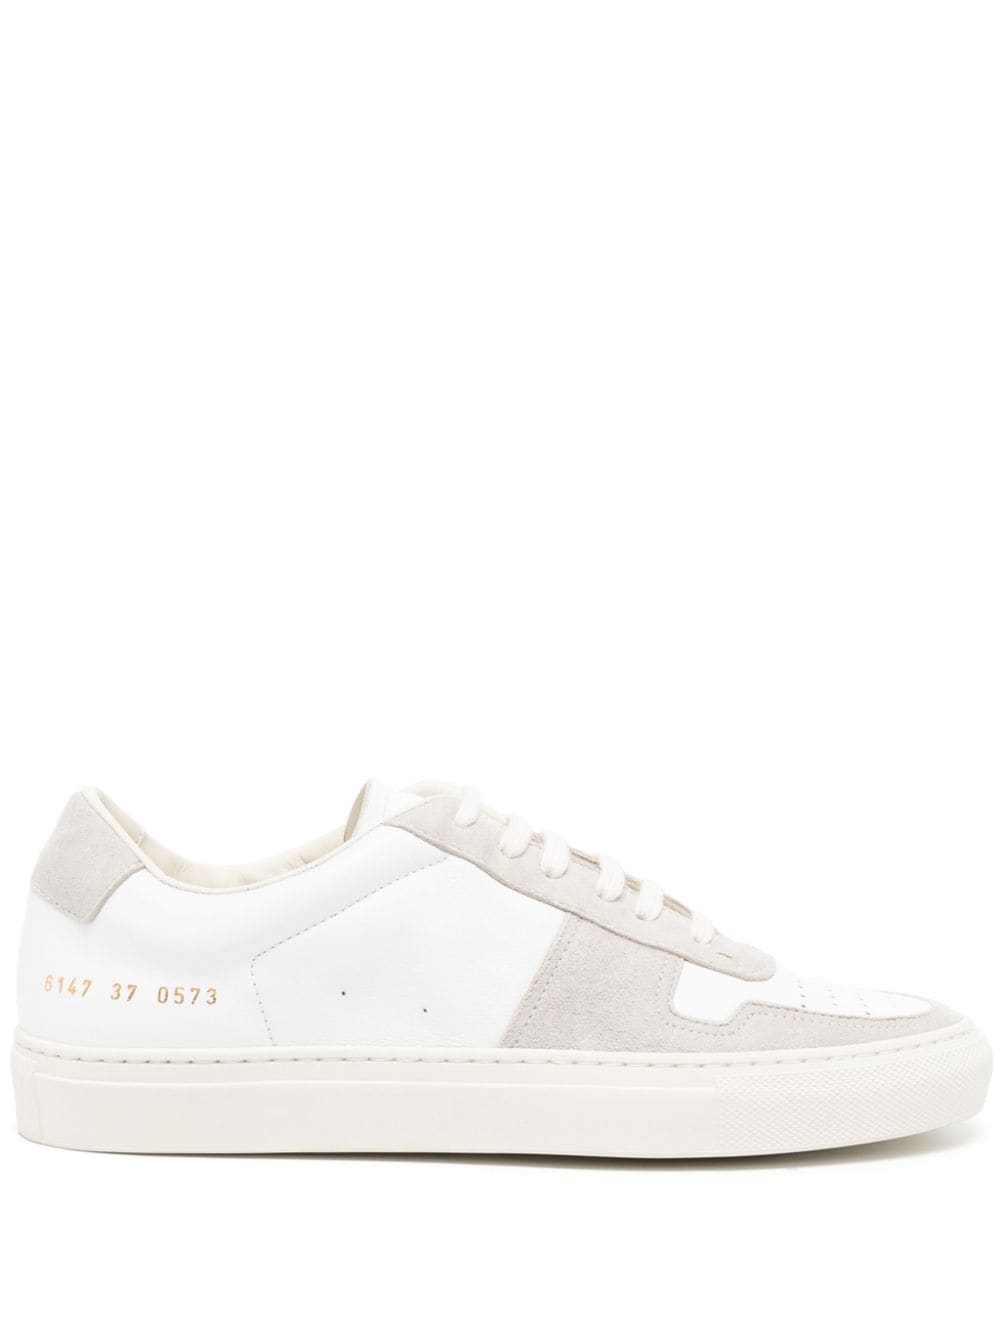 Image 1 of Common Projects Bball panelled sneakers